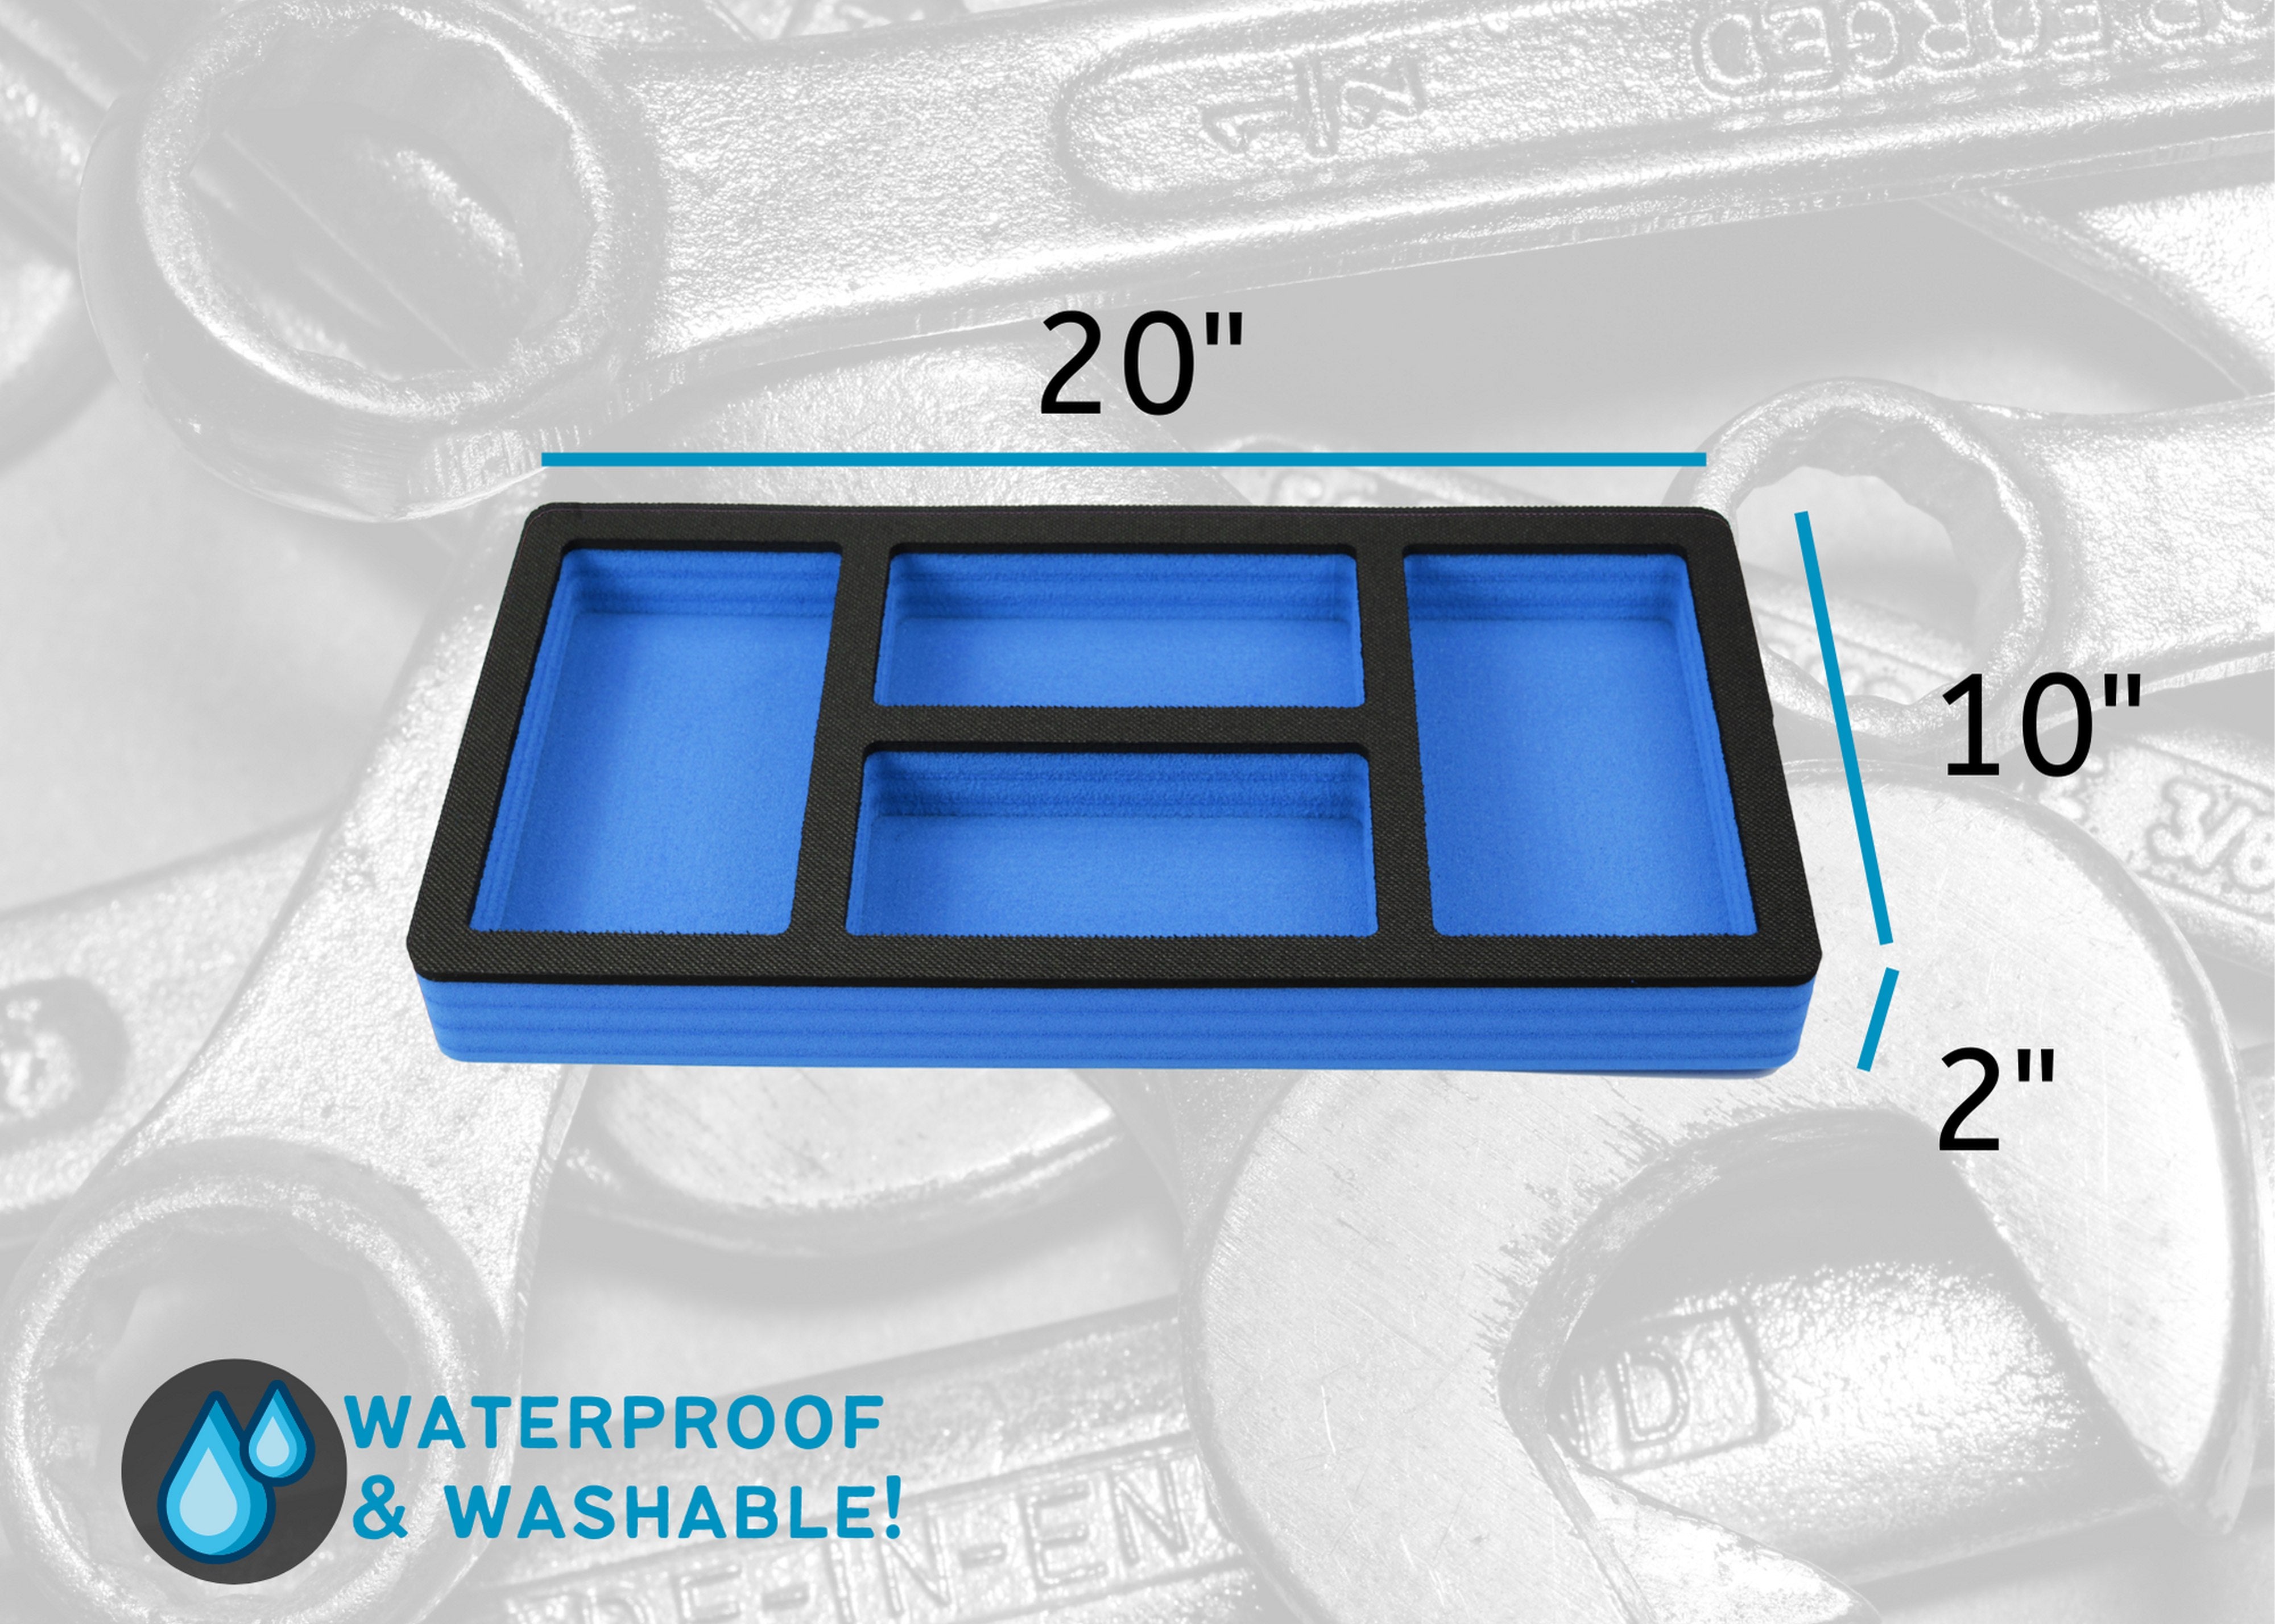 Tool Drawer Organizer Insert Blue and Black Durable Foam Strong Non-Slip Anti-Rattle Bin Holder Tray 20 x 10 Inches 4 Large Pockets Fits Craftsman Husky Kobalt Milwaukee and Many Others